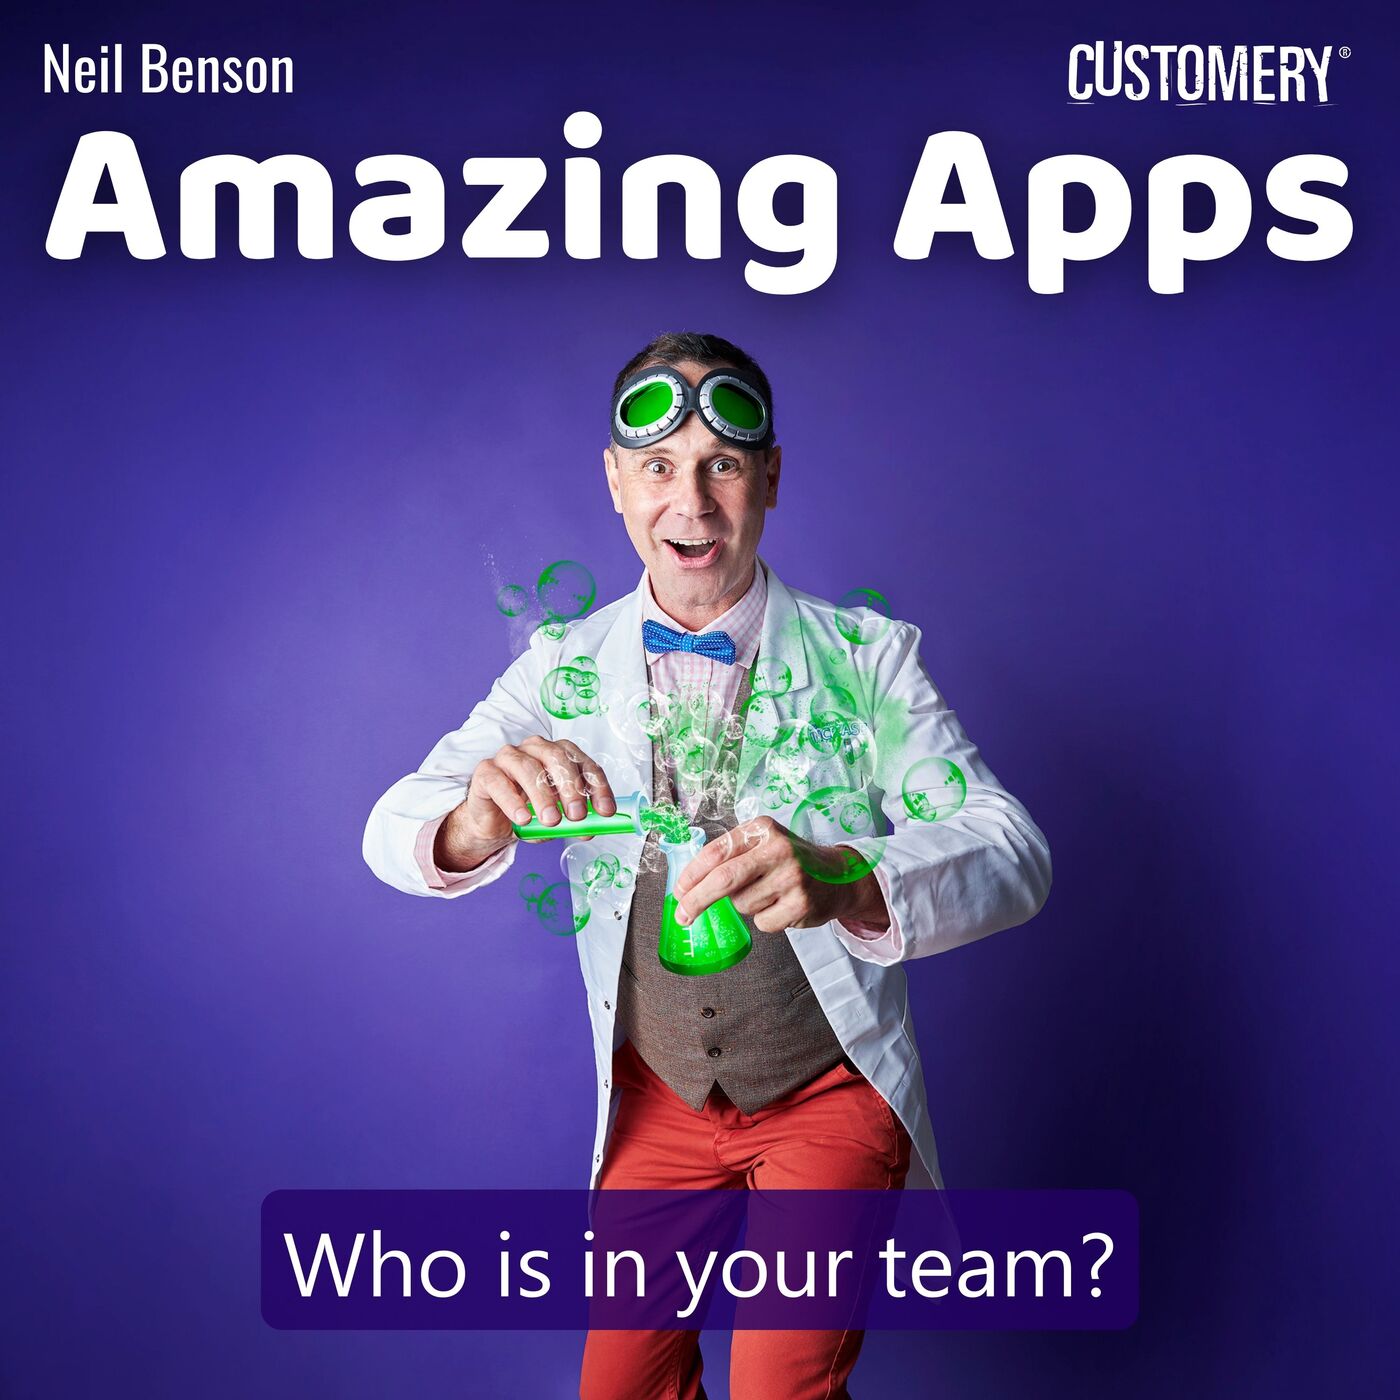 Who do we need in our Business Apps team?